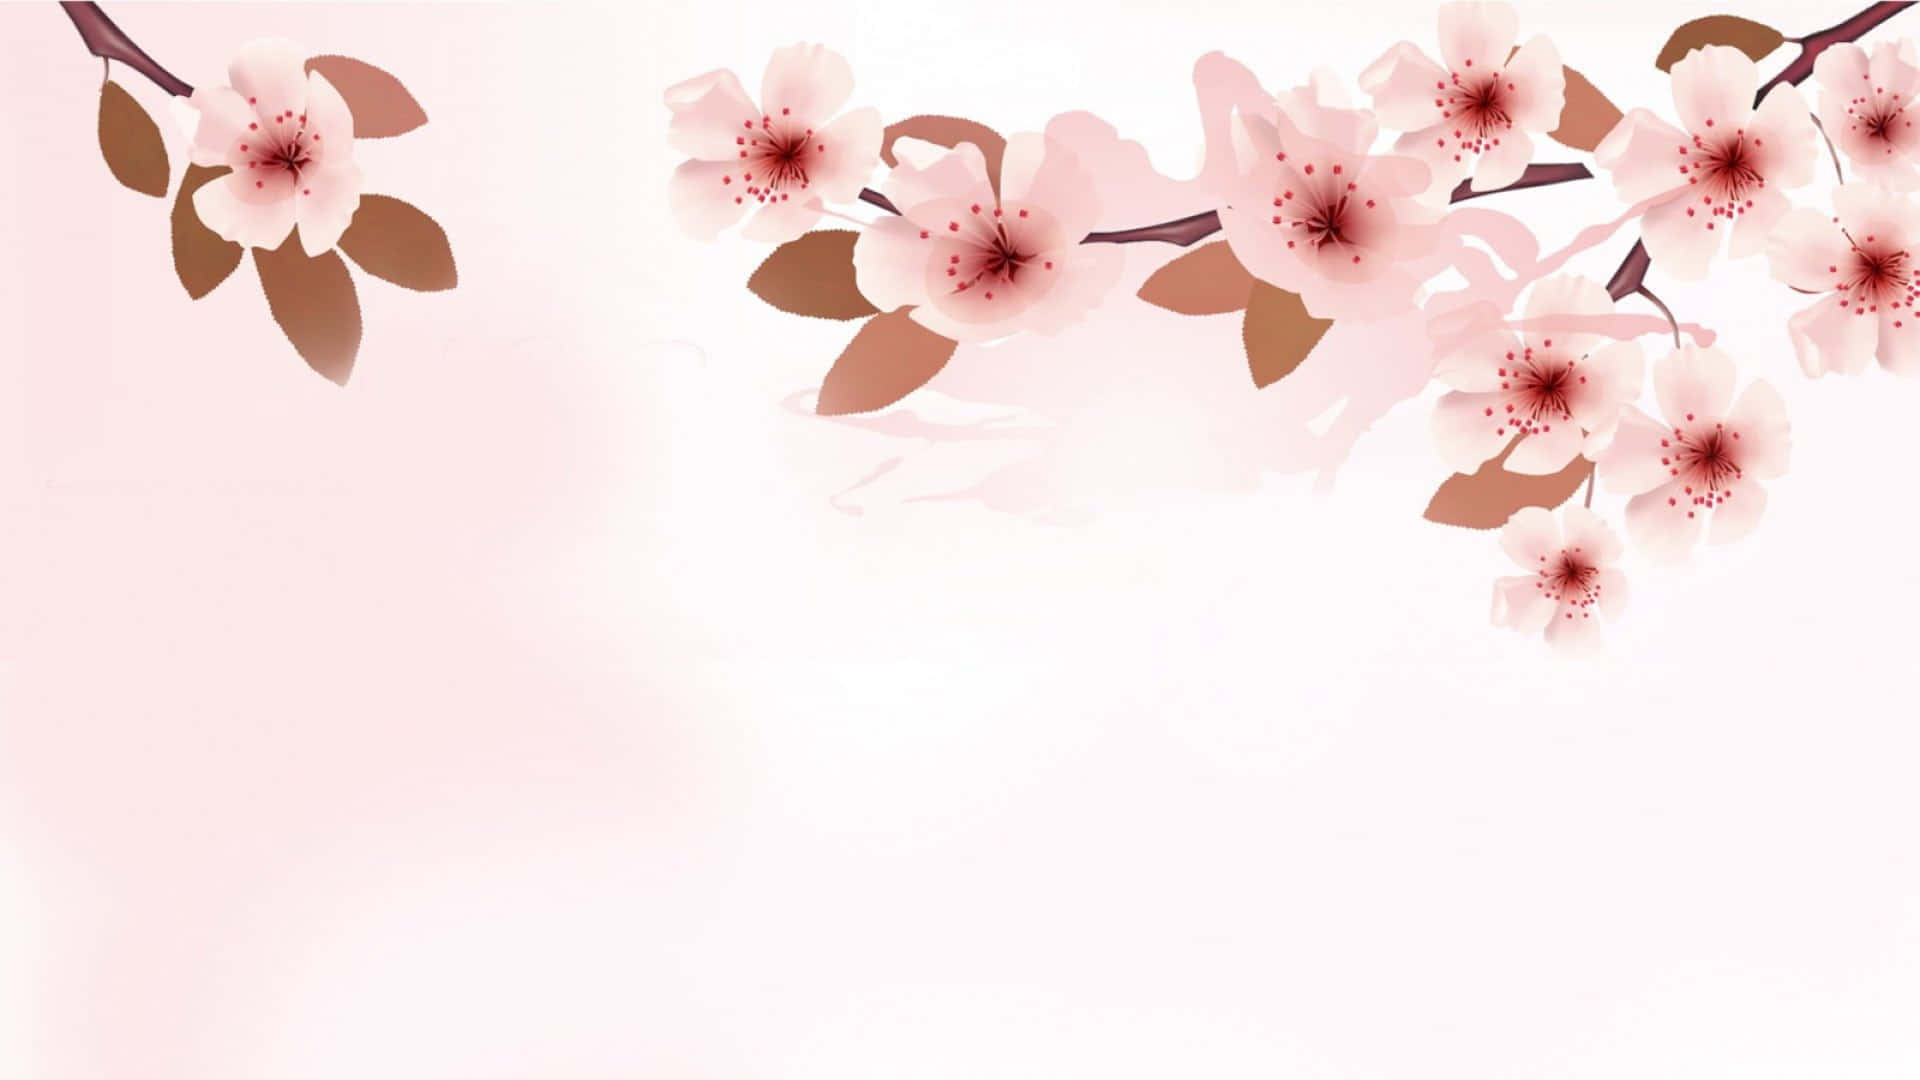 Adorable Kawaii Flower Brightening Your Day Wallpaper